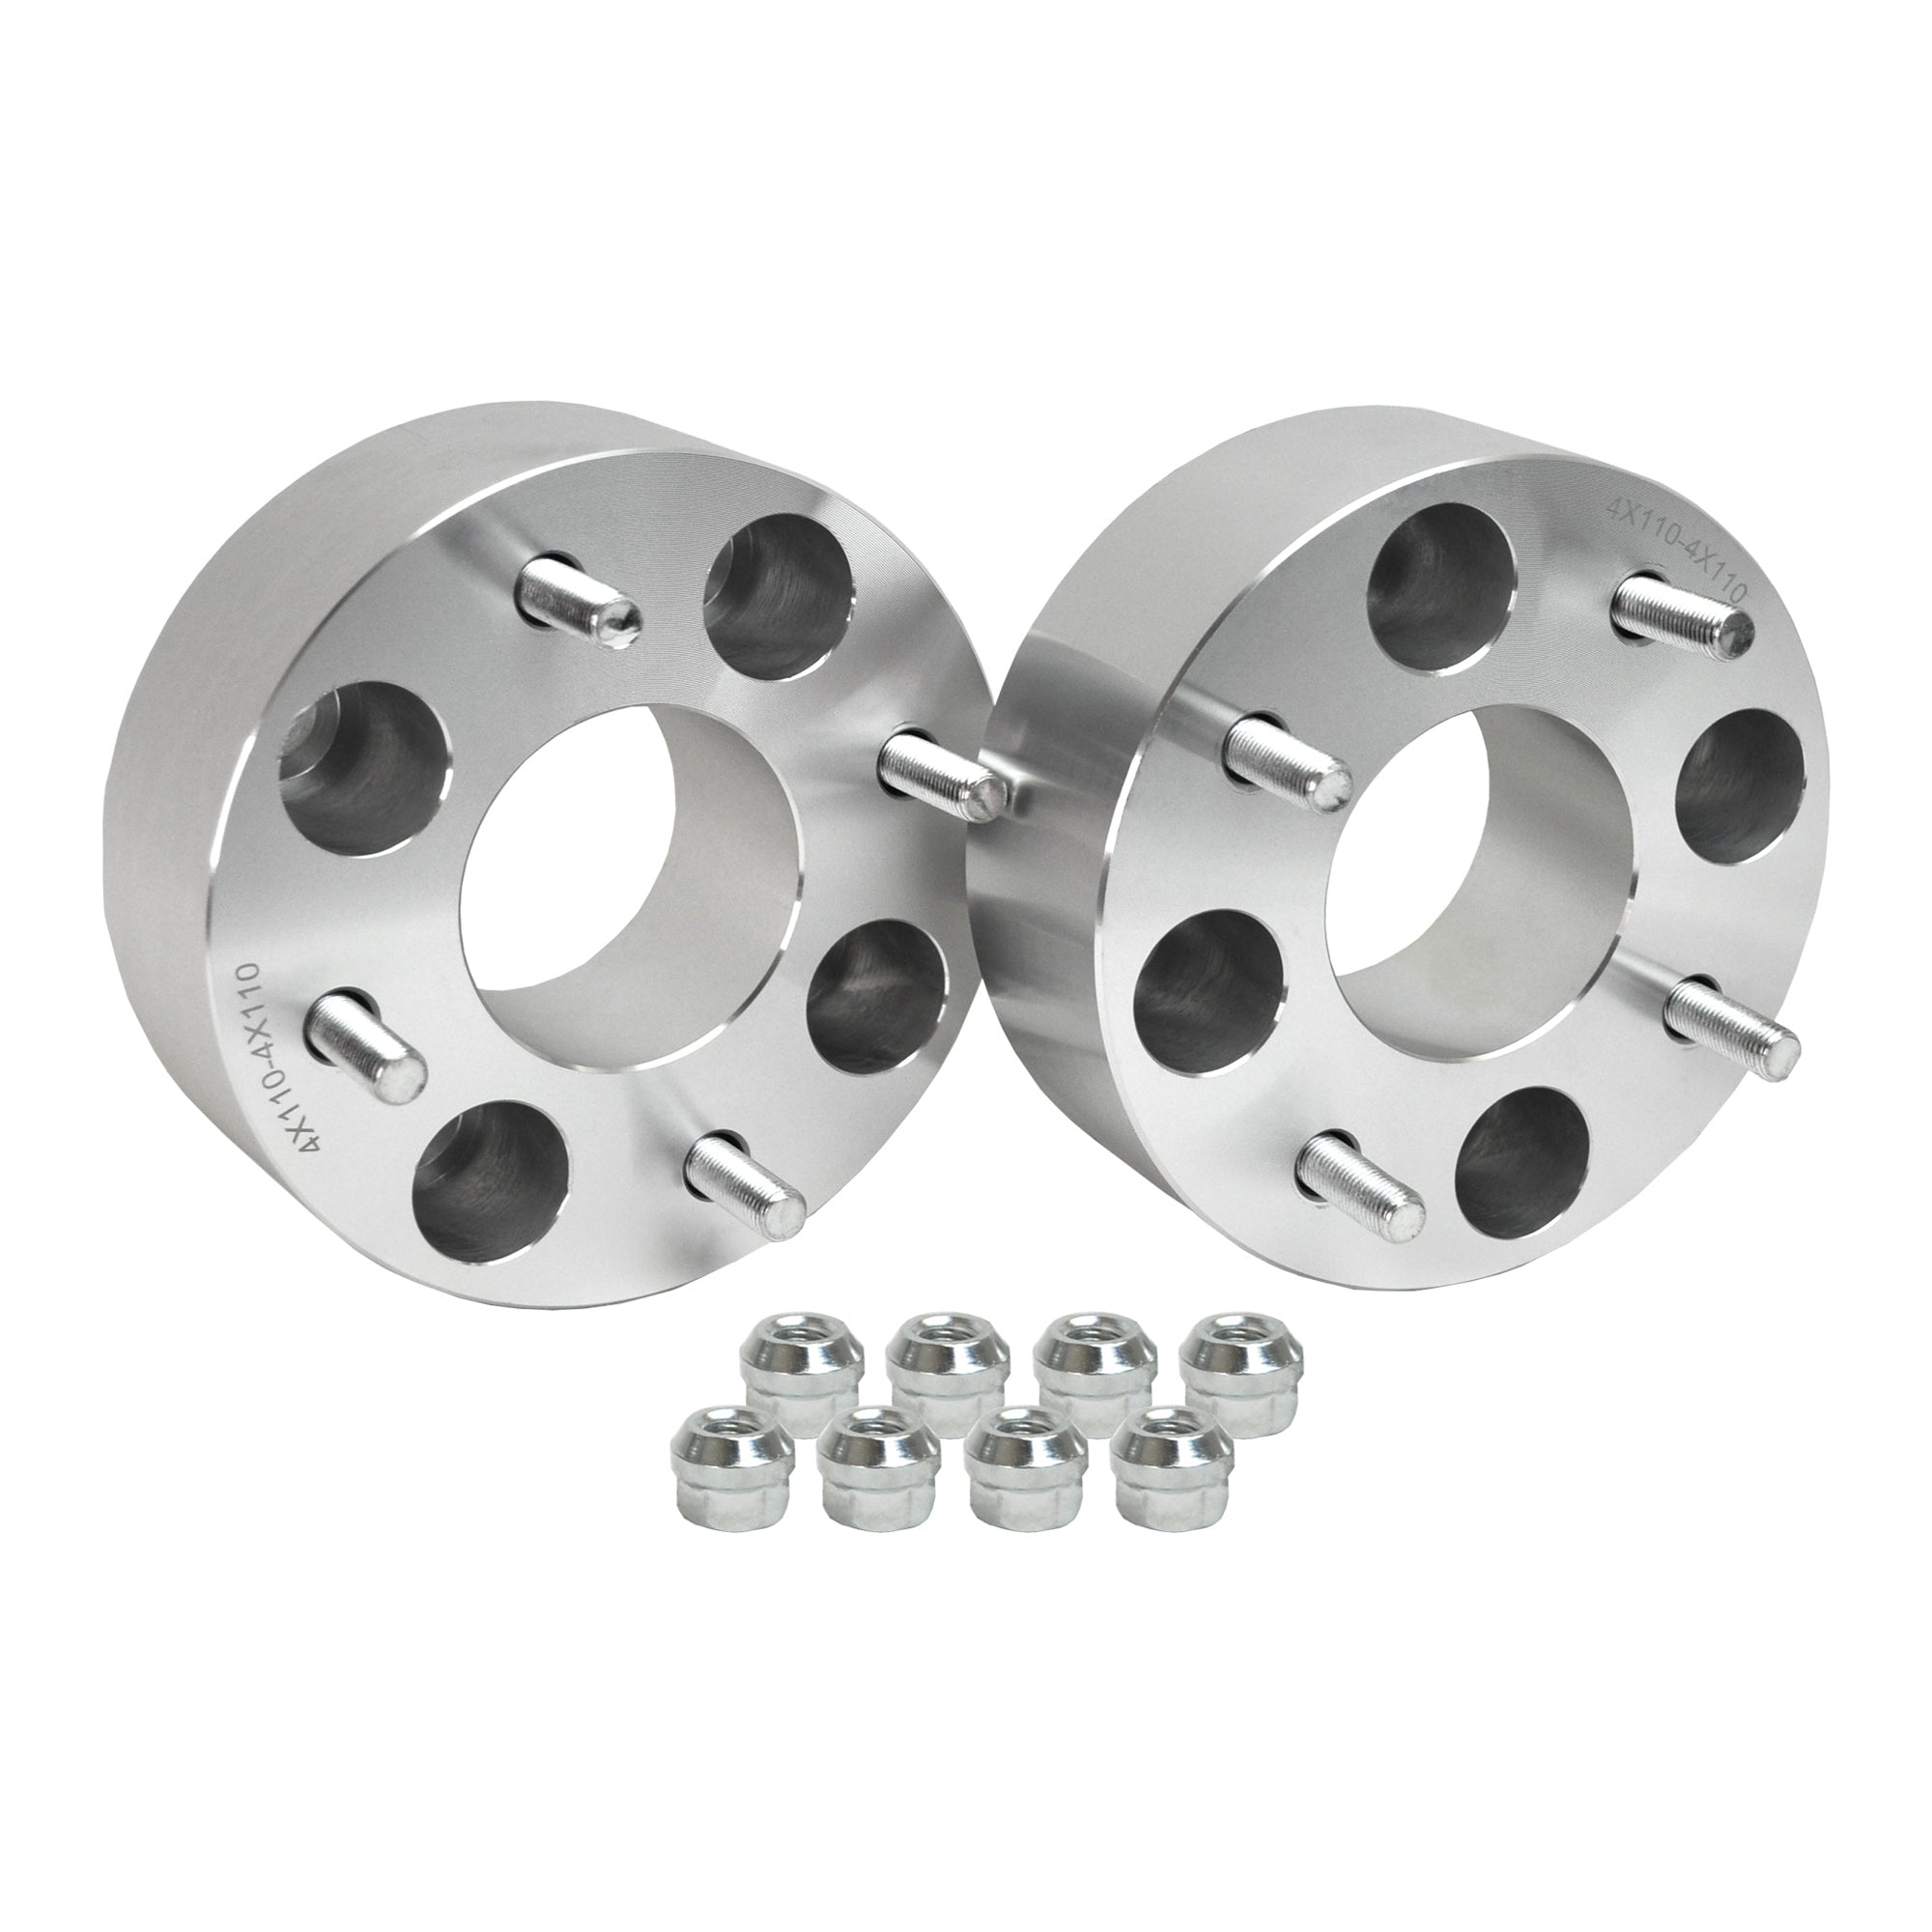 Wheel Spacer for Yamaha Grizzly 350 